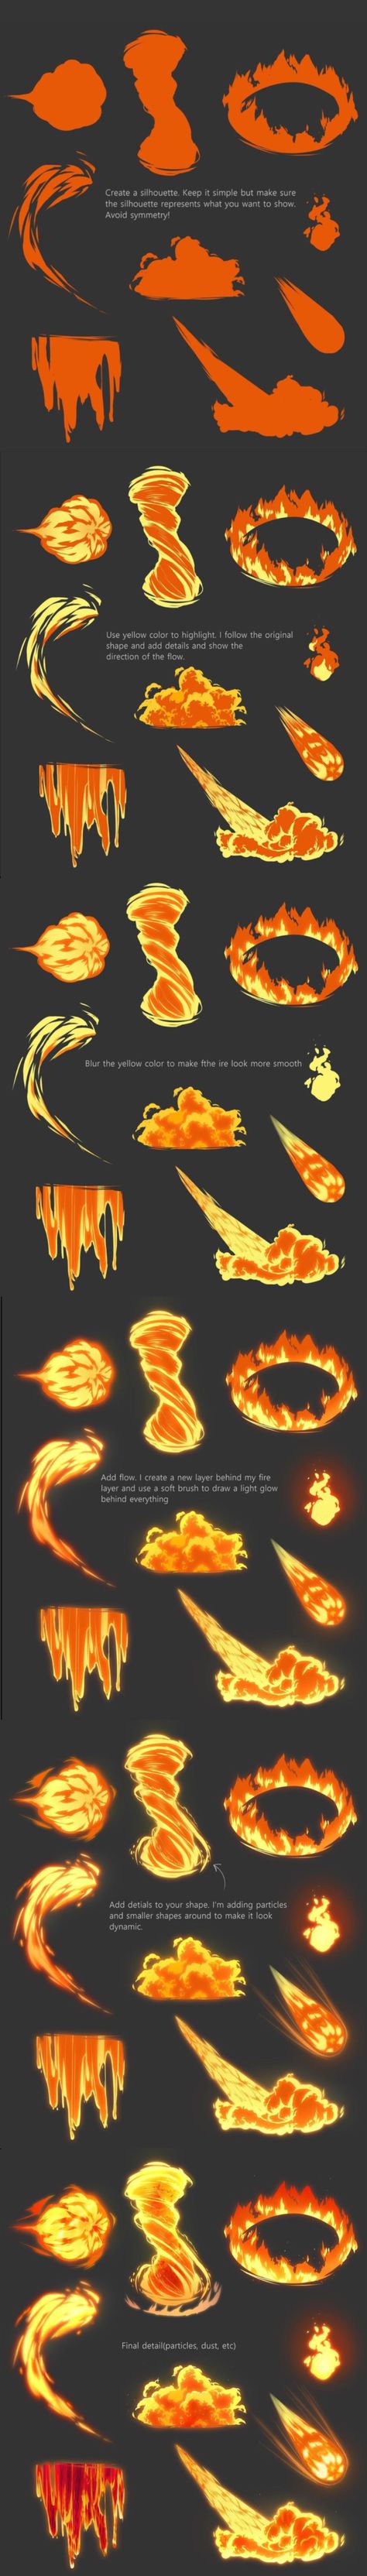 Anime Fire Tutorial, Magma Drawing Tutorial, Fire Drawing Tutorial Digital, Fire Digital Painting, Fire Energy Aesthetic, Person With Fire Powers Drawing, Painting Fire Tutorial, Lava Drawing Tutorial, Digital Art Effects Tutorial